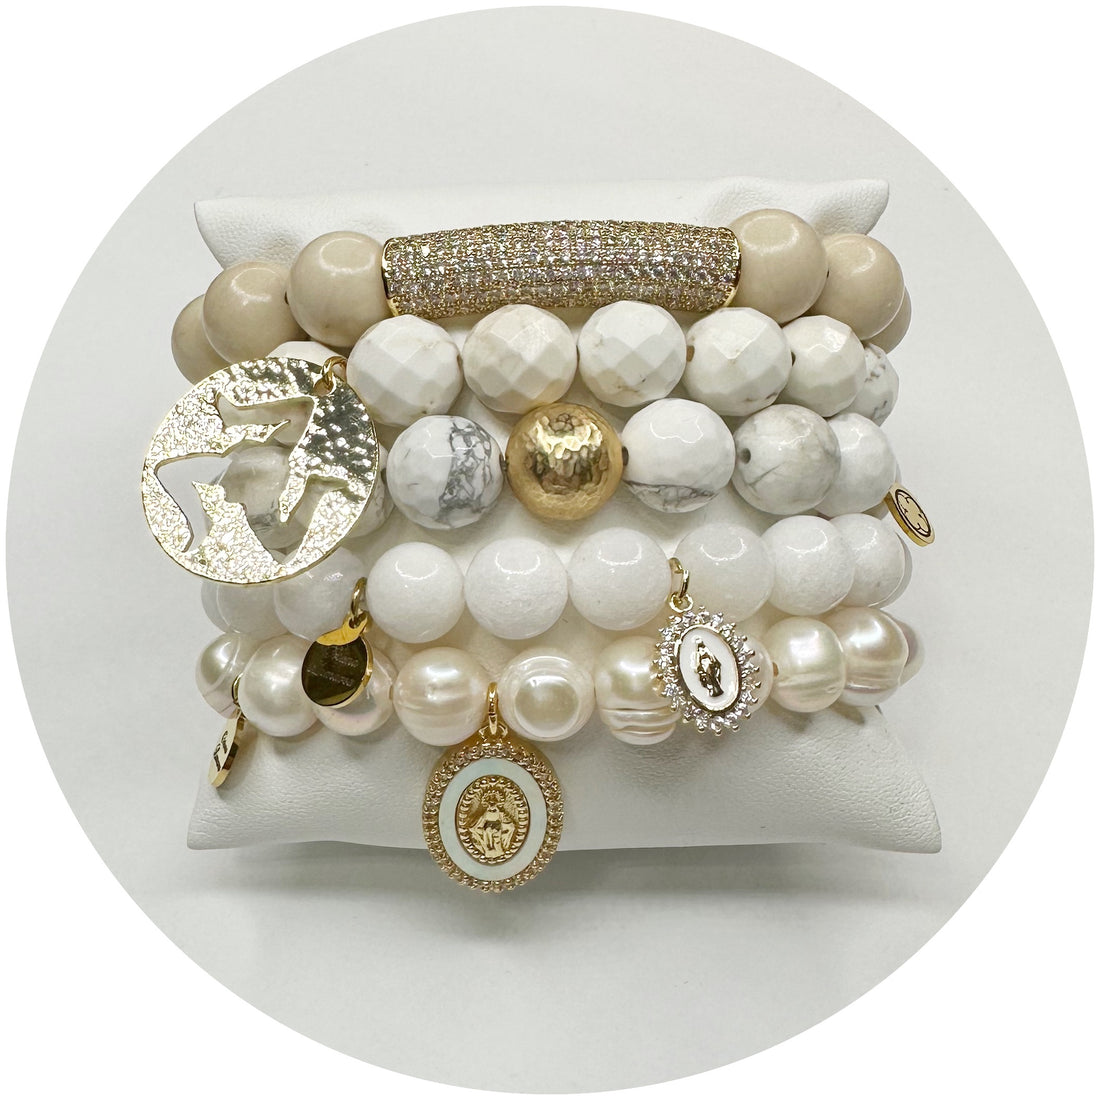 The Godmother Armparty